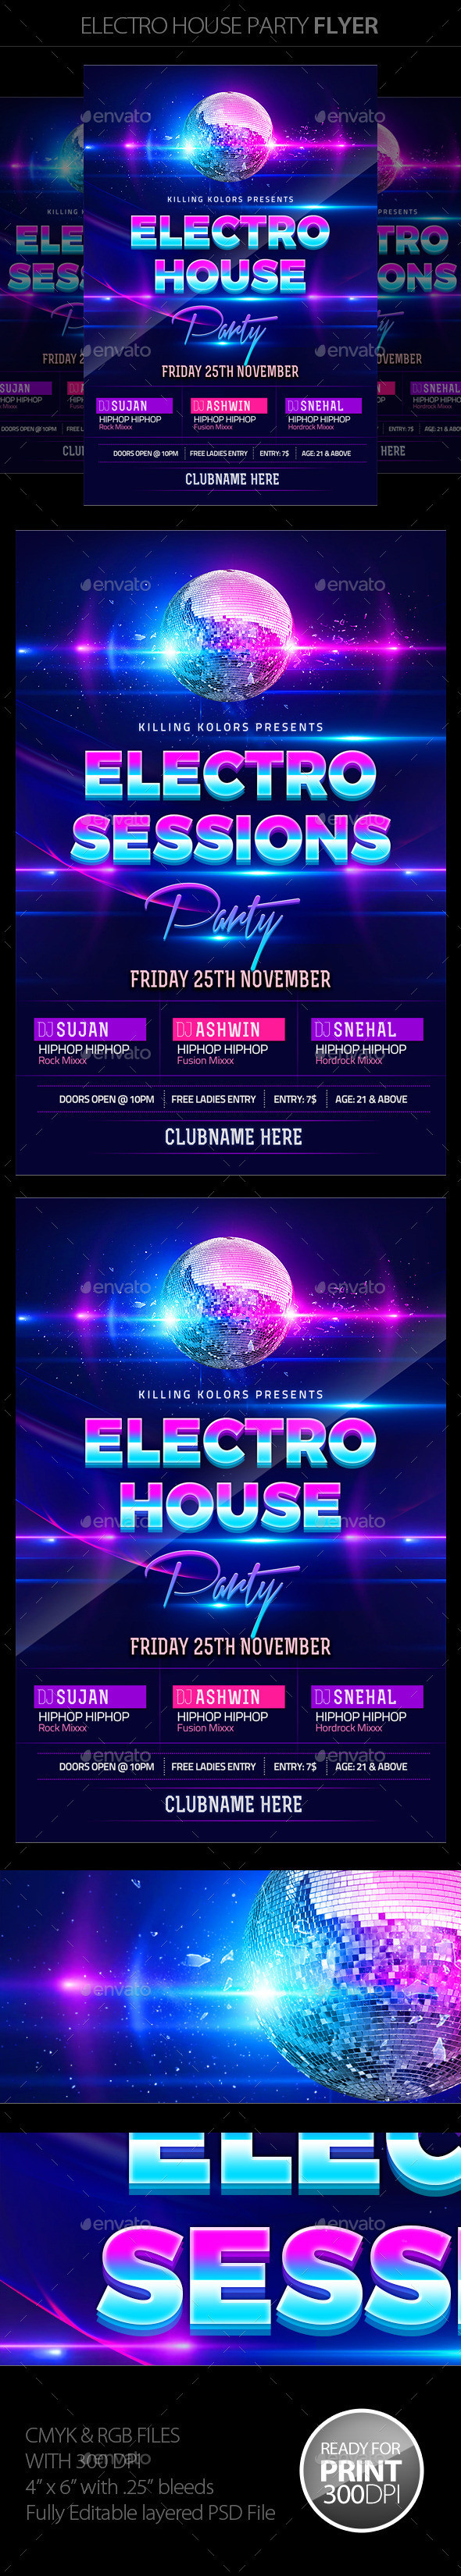 Electro 20house 20party 20flyer 20preview